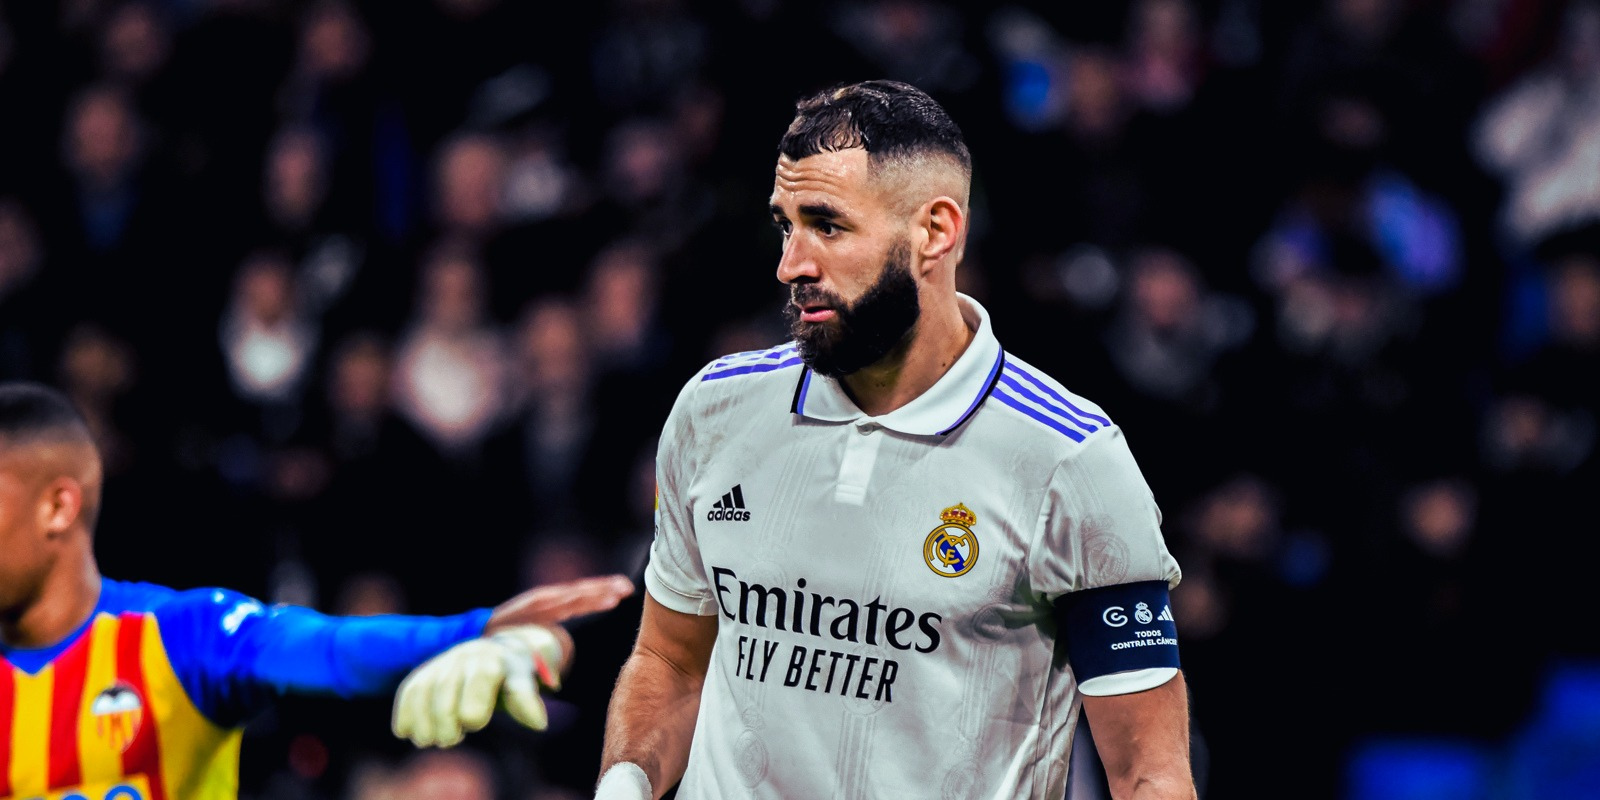 The next fire that Florentino will put out at Real Madrid: another Benzema case
	
